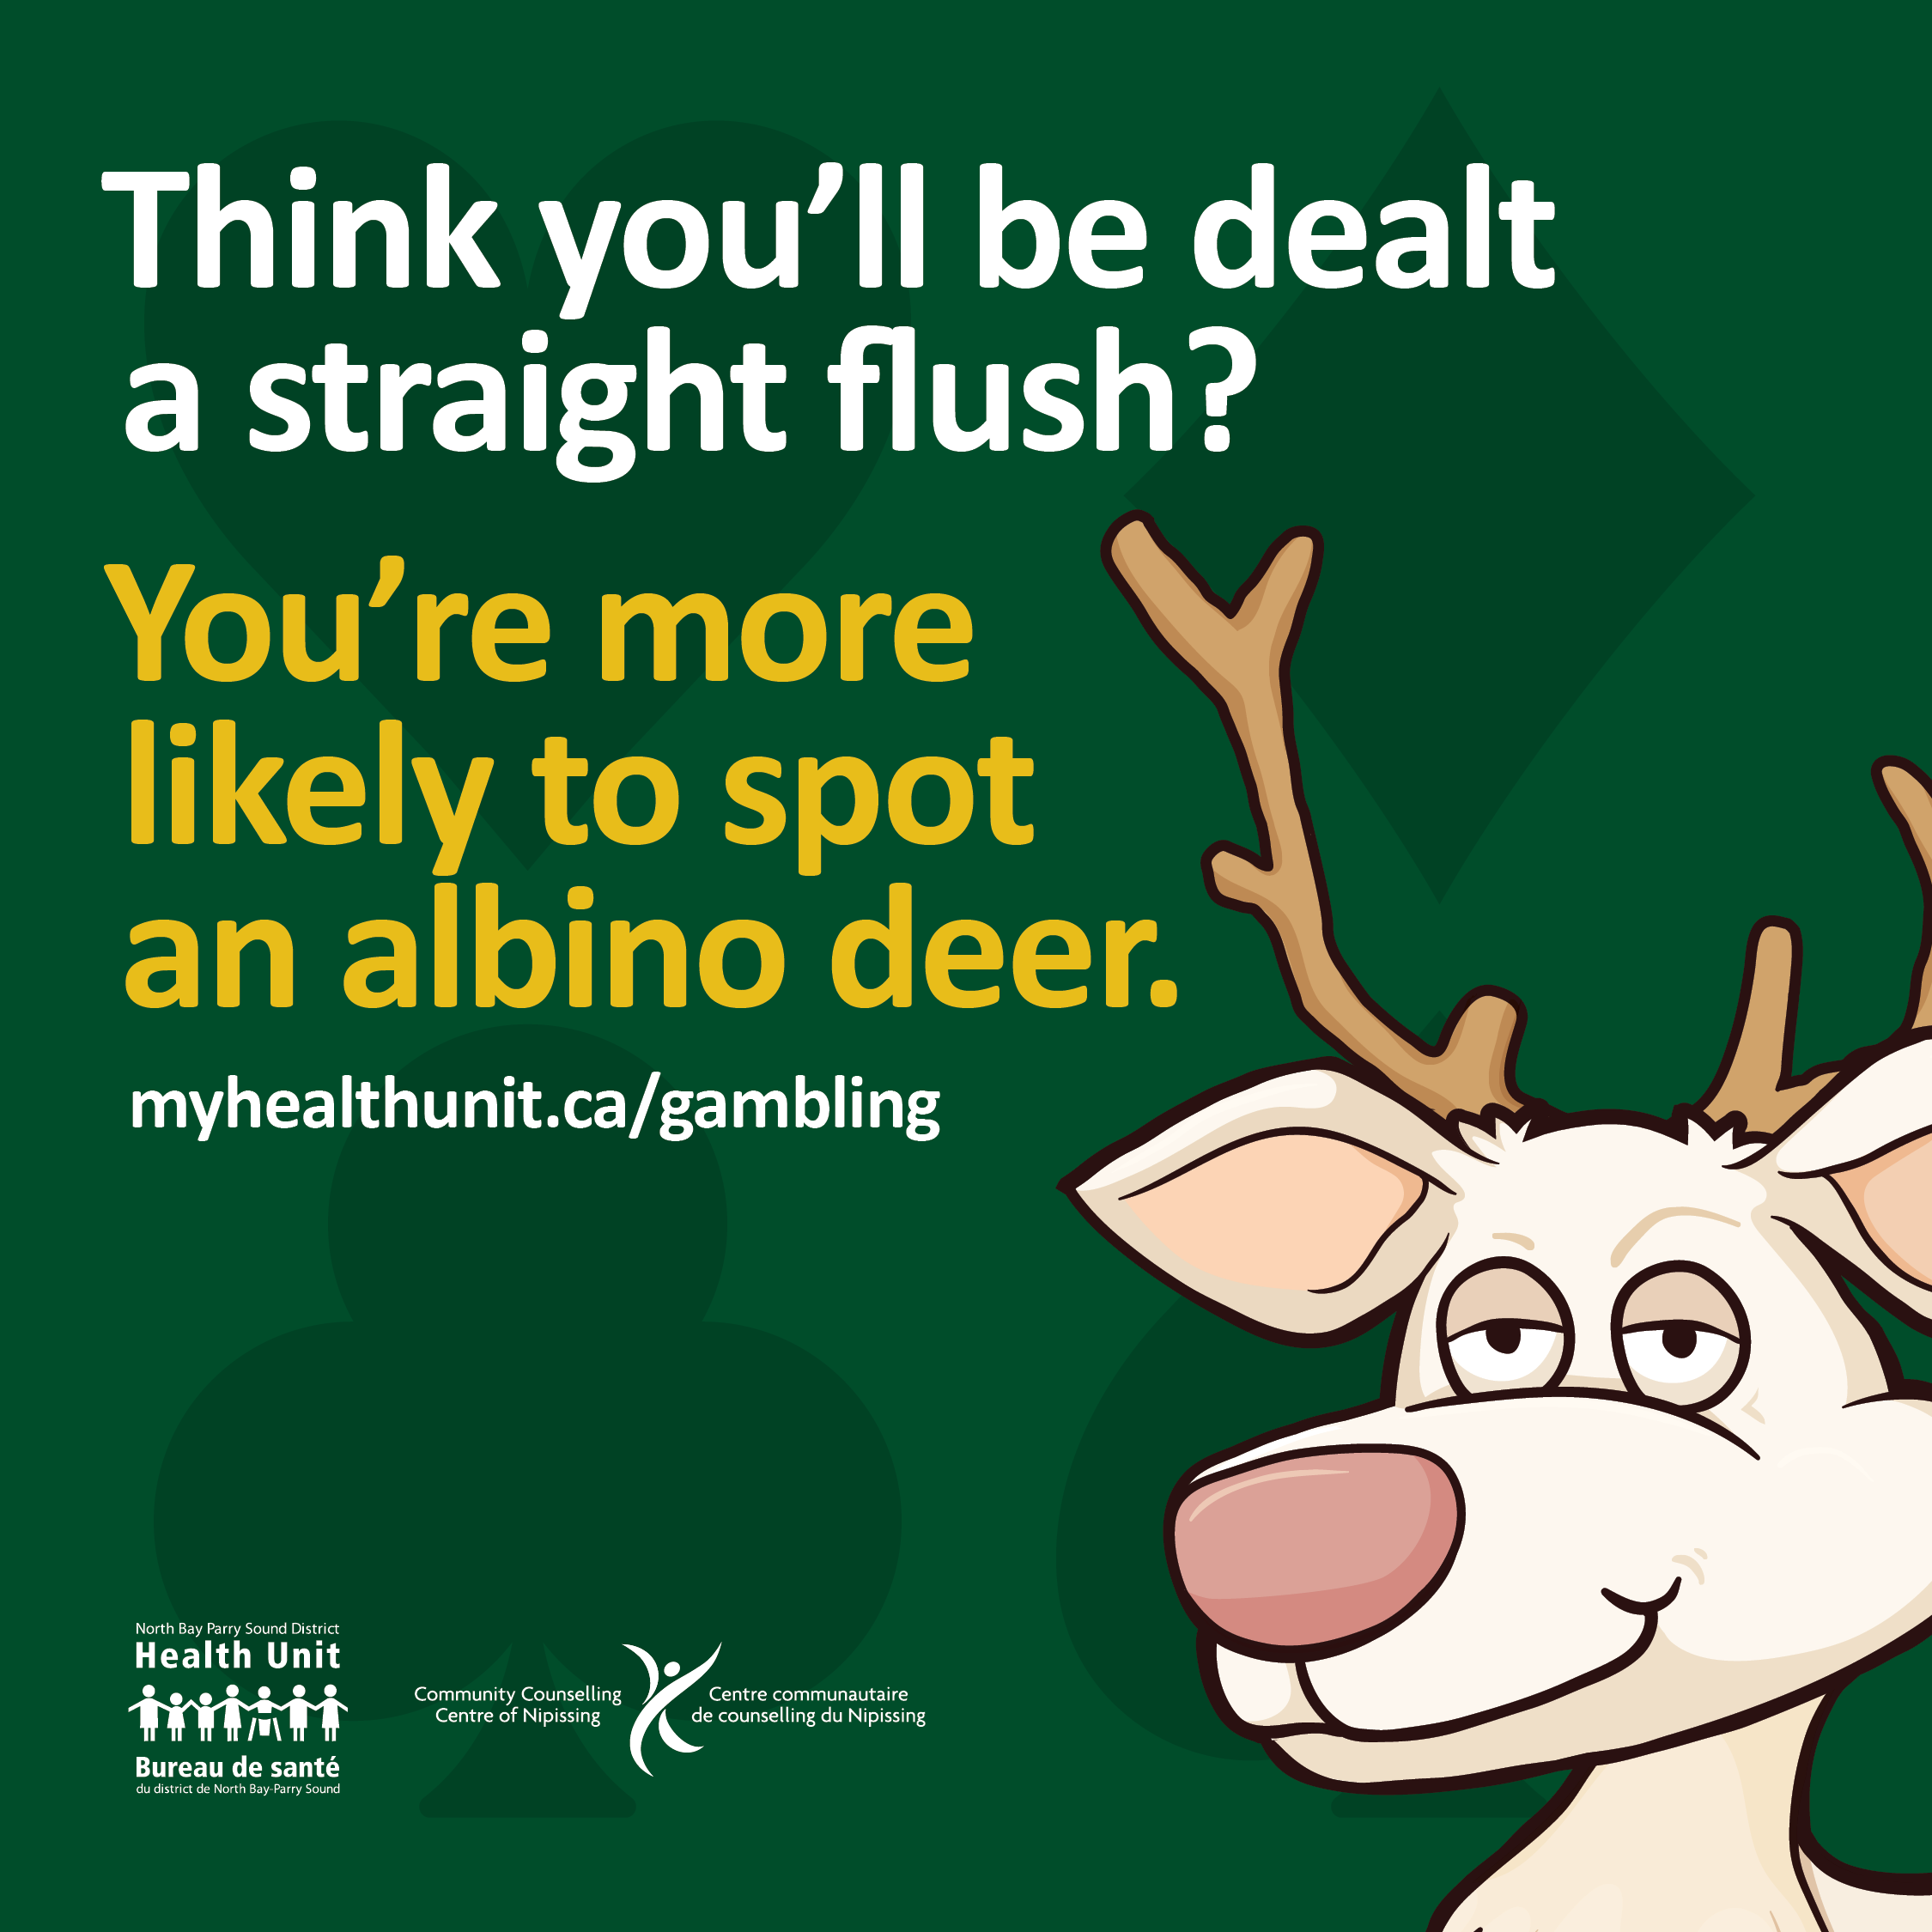 Think you'll be dealt a straight flush? You're more likely to spot an albino deer.